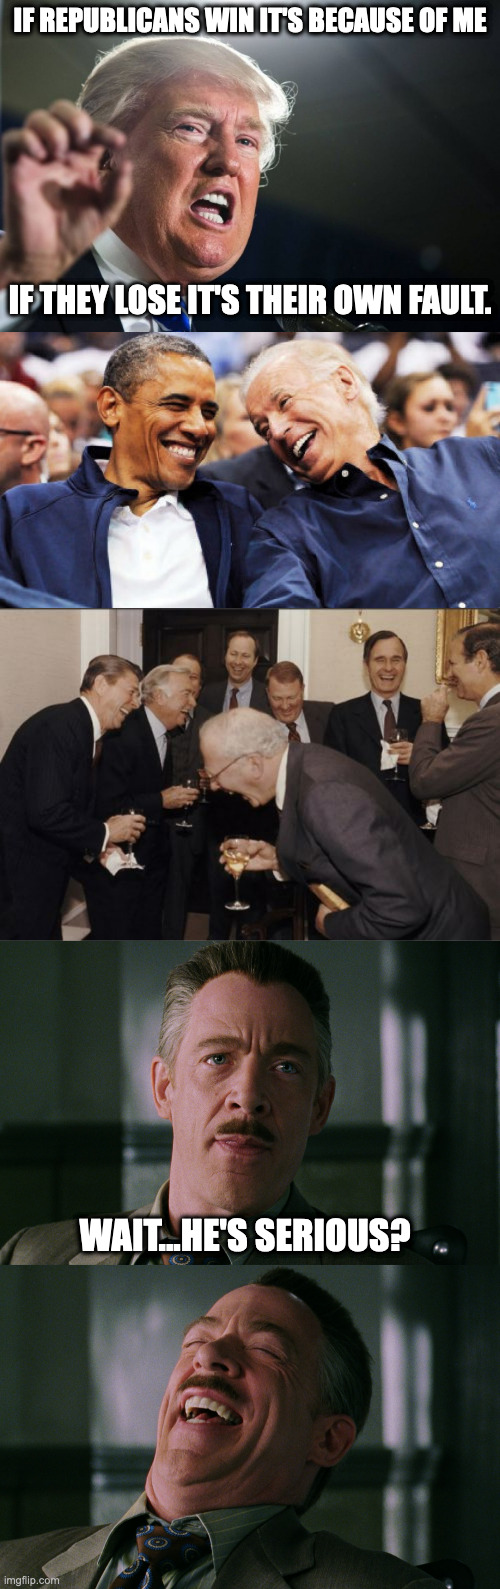 Gotta love the abandon ship mentality. | IF REPUBLICANS WIN IT'S BECAUSE OF ME; IF THEY LOSE IT'S THEIR OWN FAULT. WAIT...HE'S SERIOUS? | image tagged in donald trump,obama and biden laughing,memes,laughing men in suits,j jonah jameson laughing | made w/ Imgflip meme maker